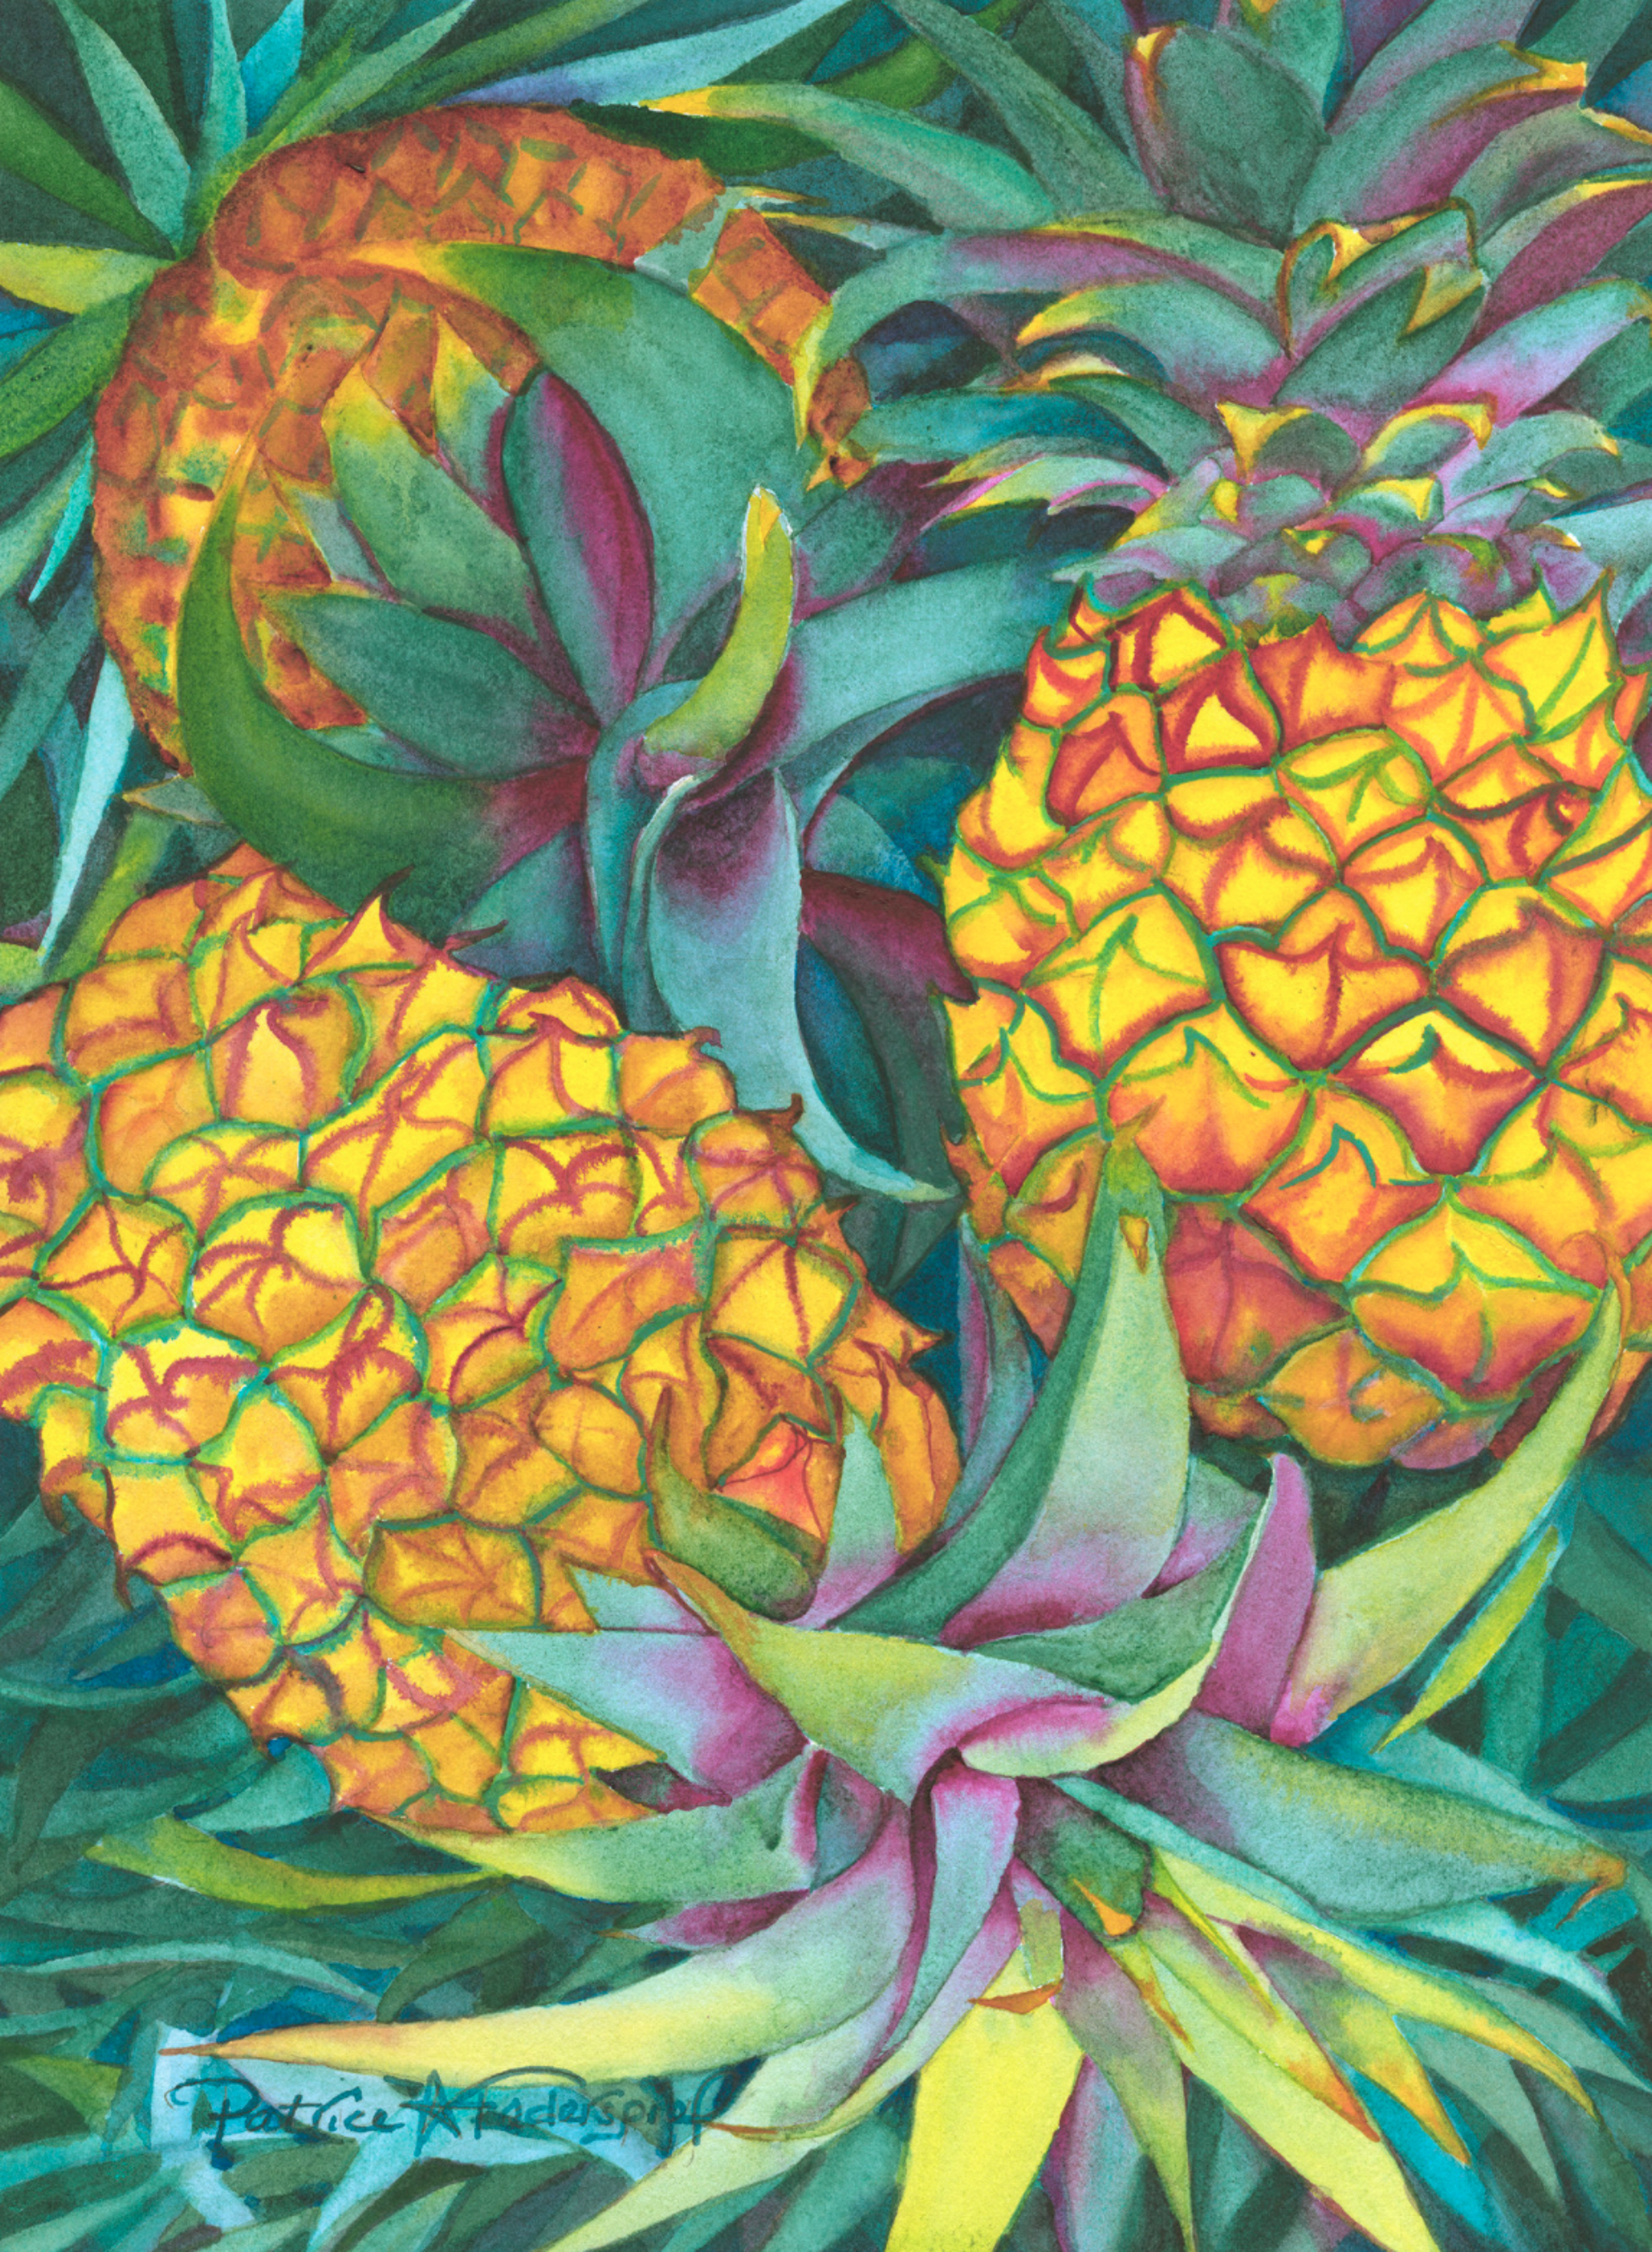 A Passion for Pineapples by Patrice Ann Federspiel